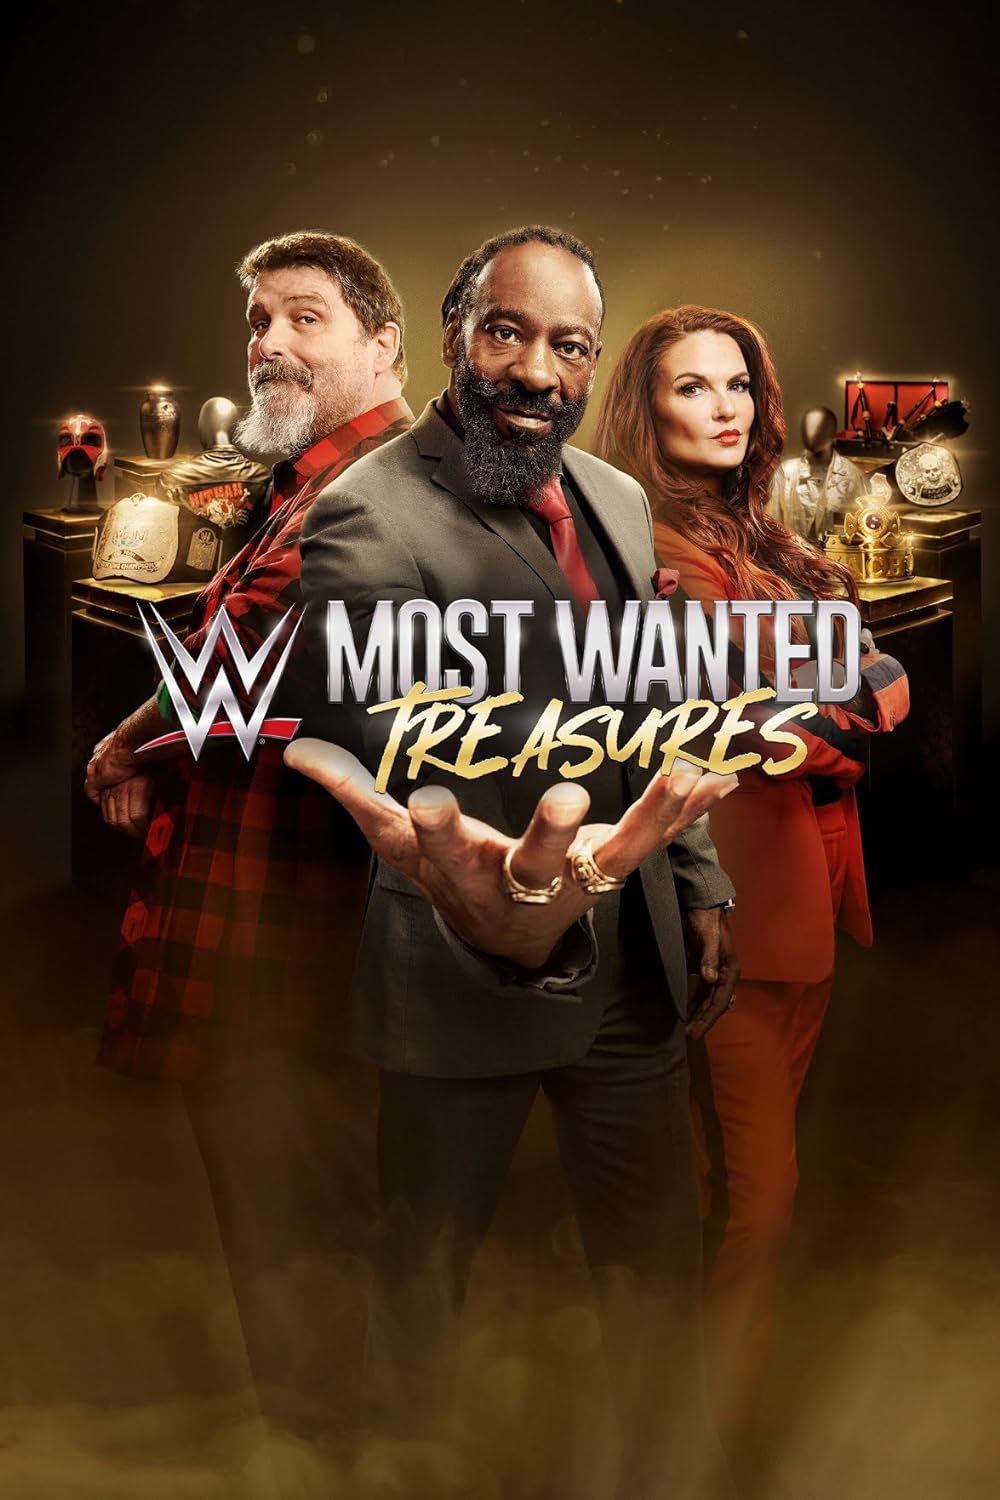 WWE's Most Wanted Treasures